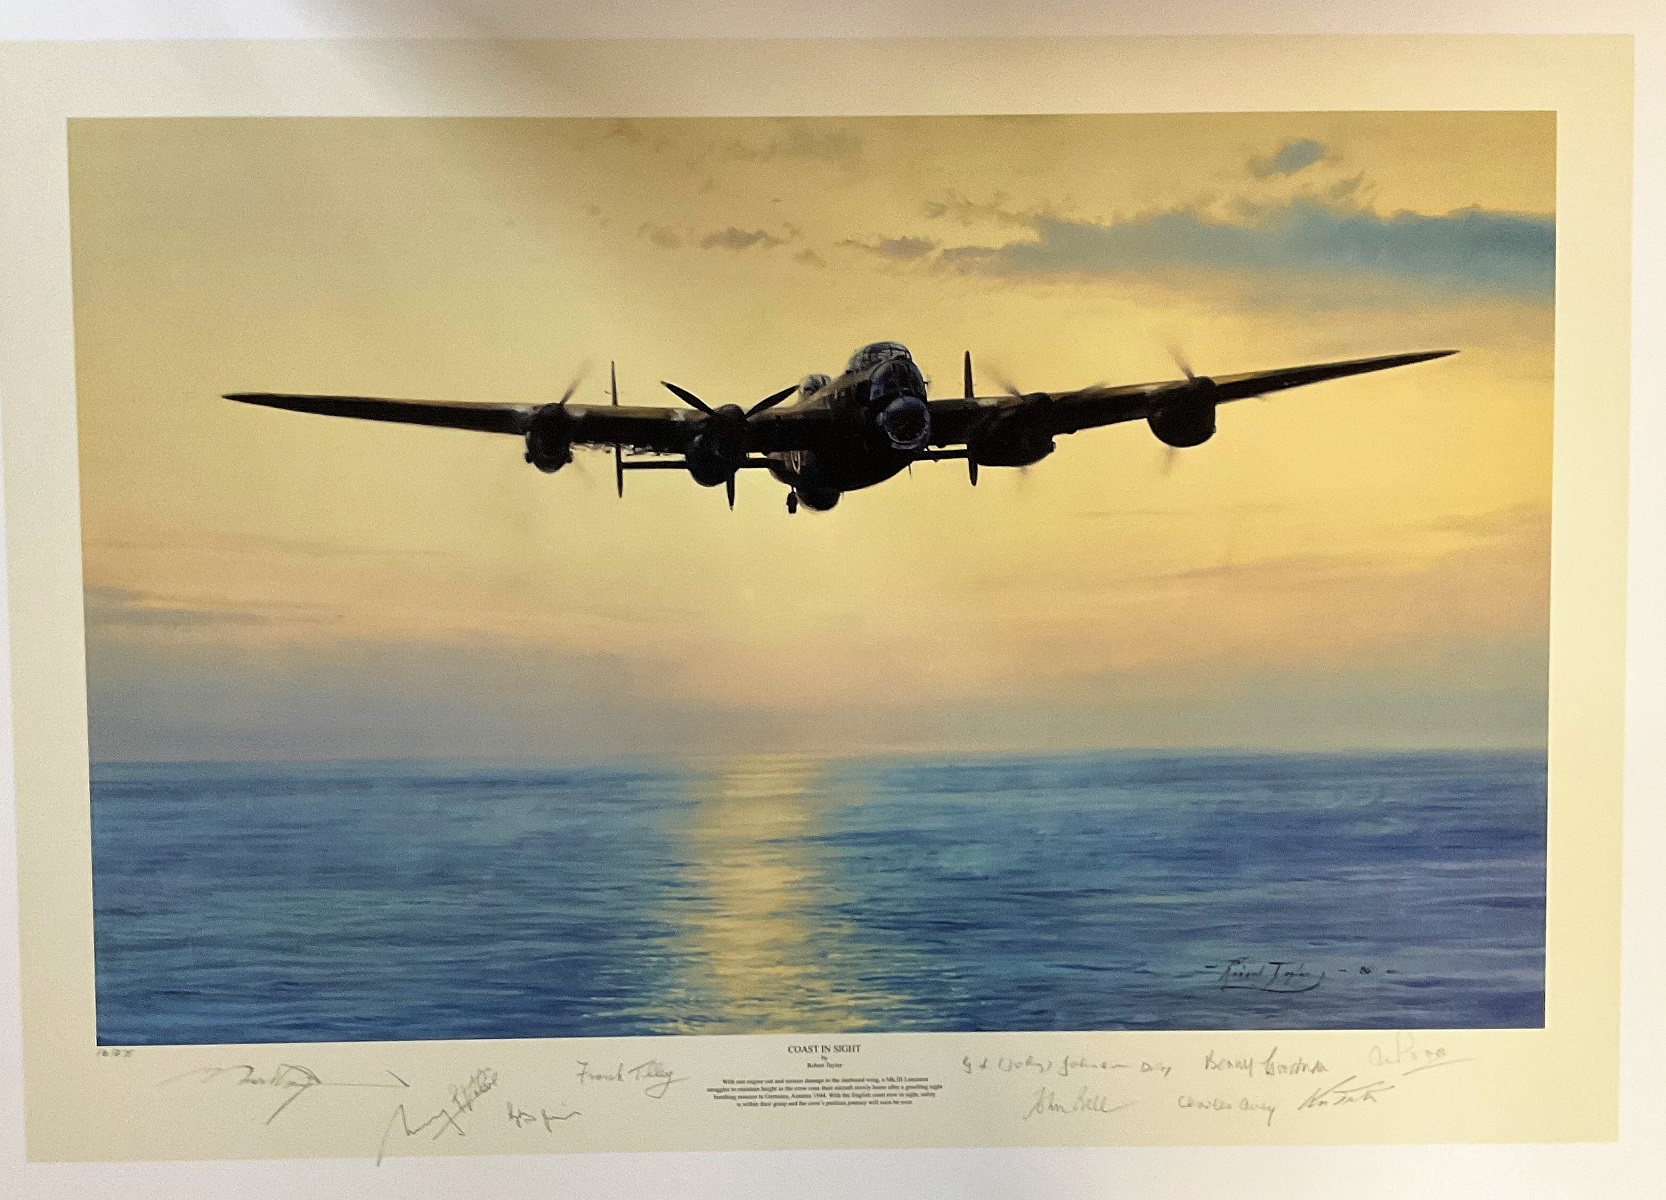 Robert Taylor Multi Signed Colour 32x23 Limited Edition 10/275 Print Titled 'Coast In Sight'. Signed